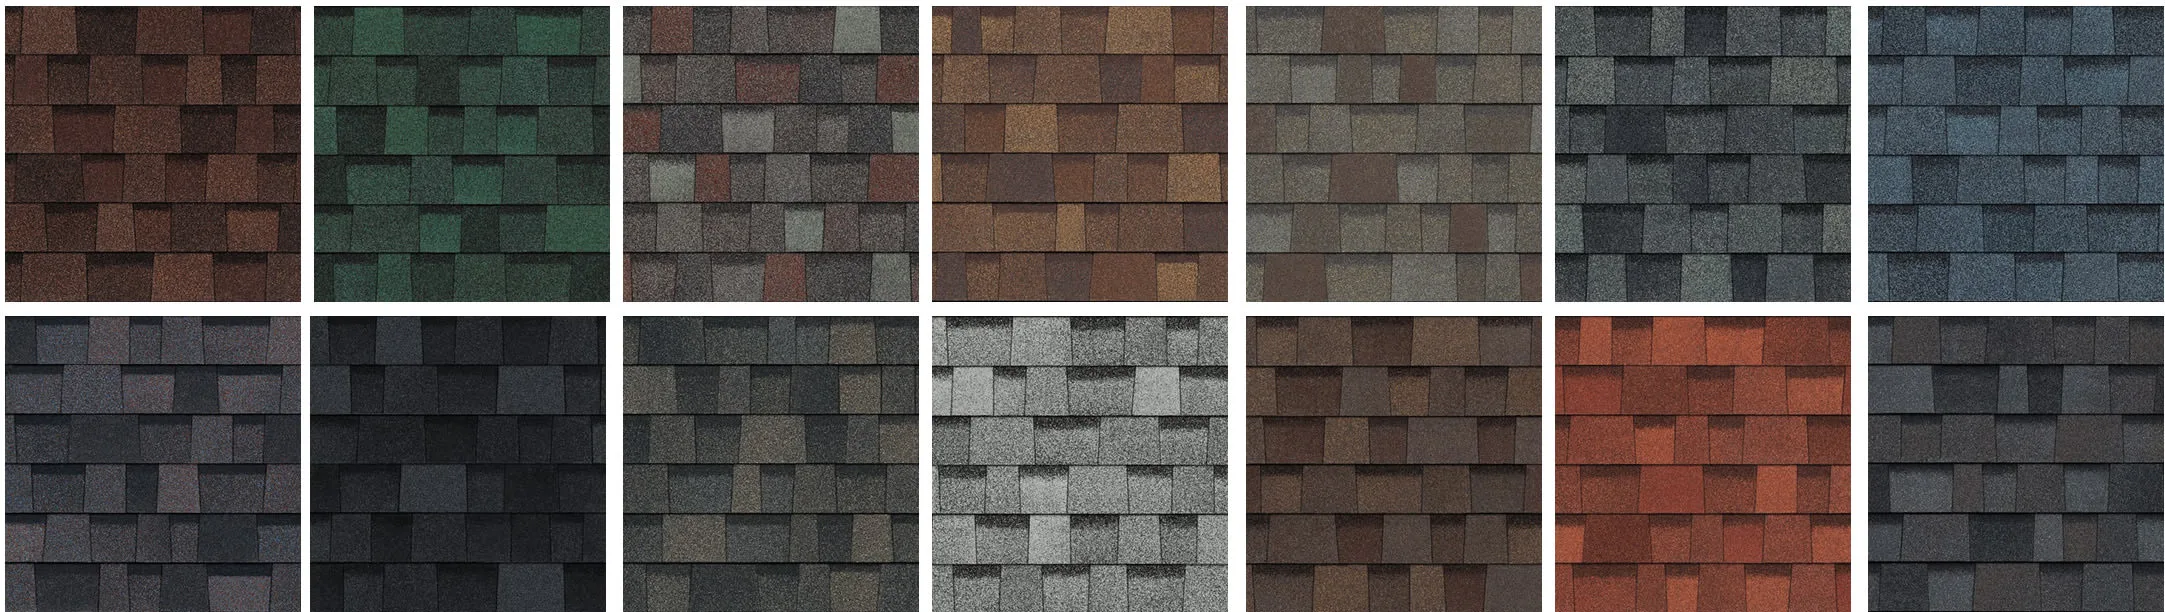 Different Roofing Color Options and Styles